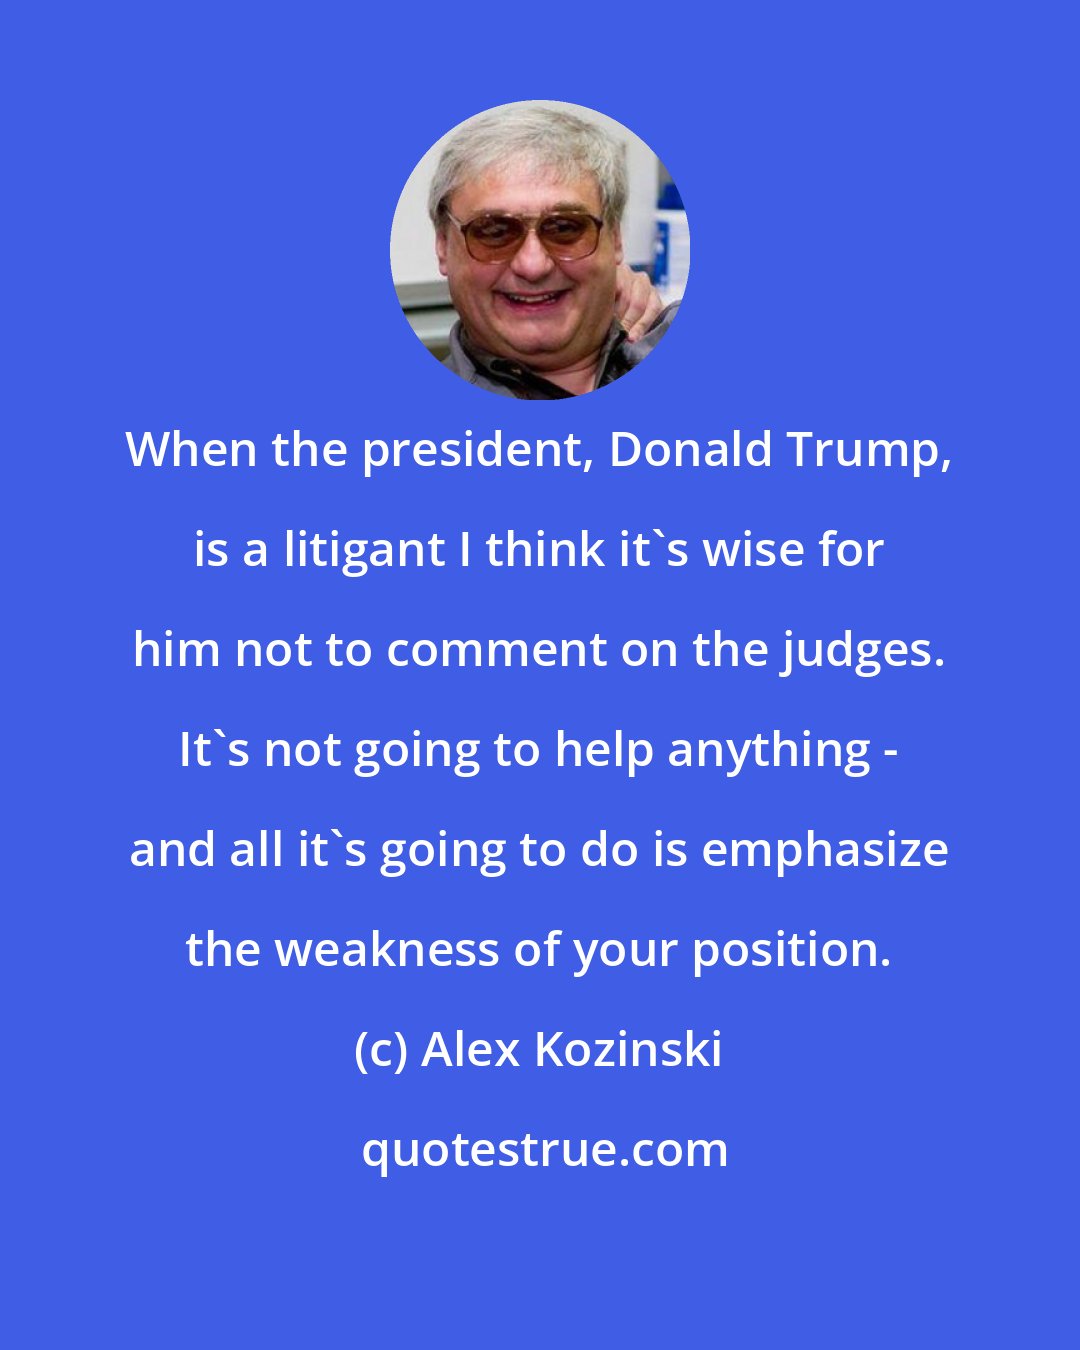 Alex Kozinski: When the president, Donald Trump, is a litigant I think it's wise for him not to comment on the judges. It's not going to help anything - and all it's going to do is emphasize the weakness of your position.